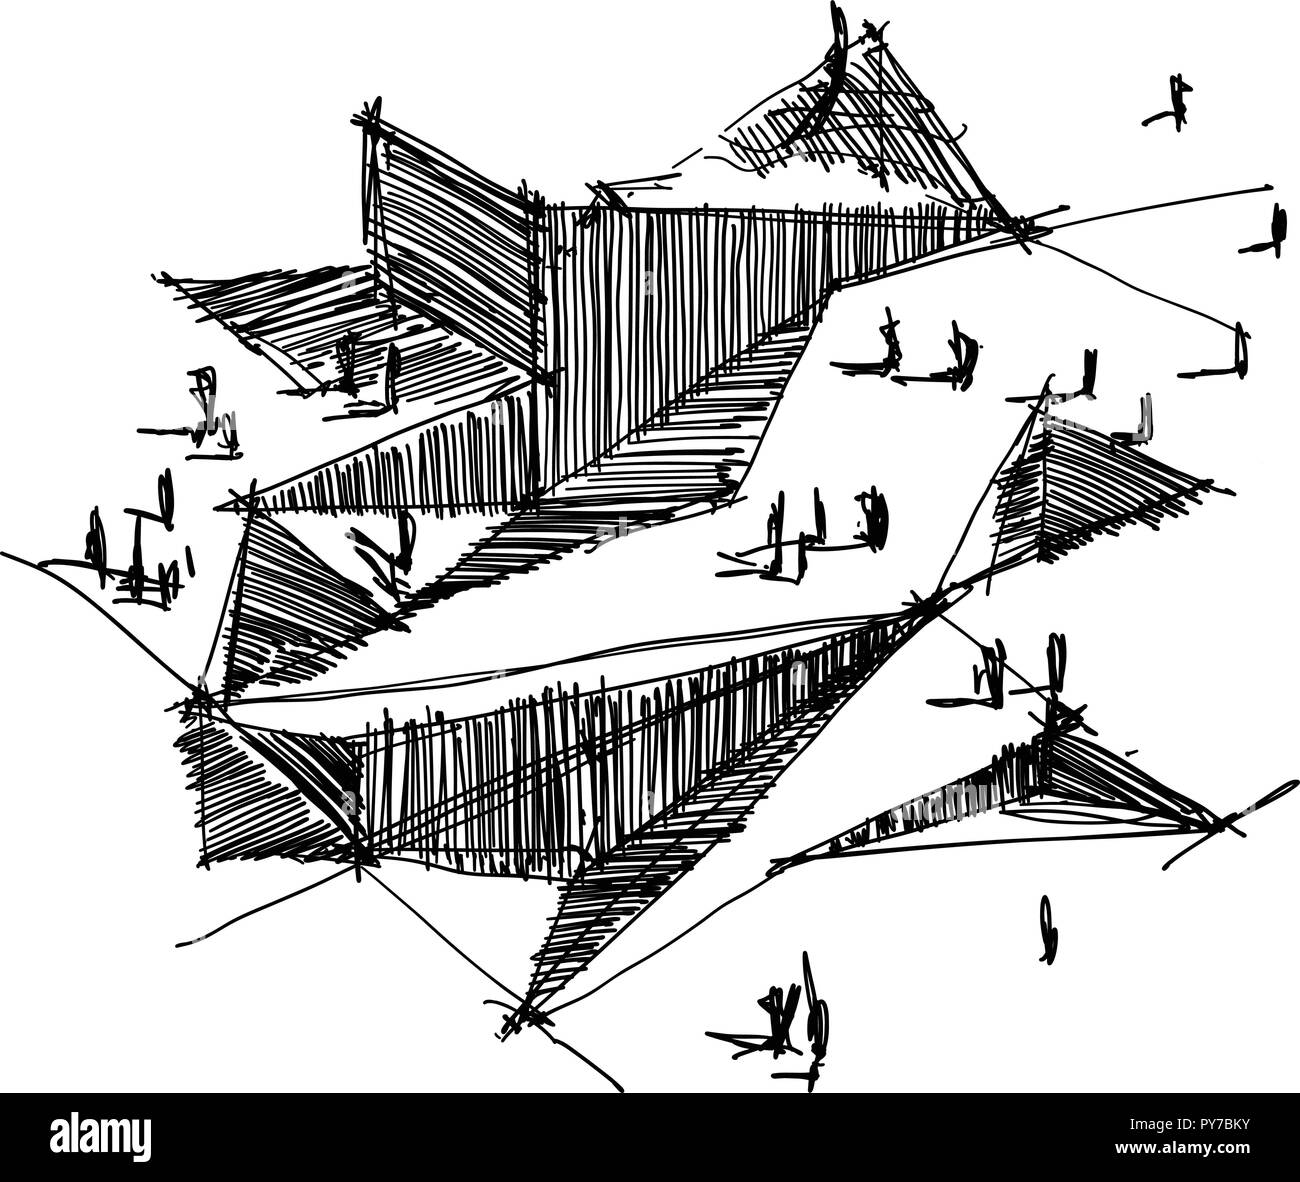 hand drawn architectural sketch of a modern abstract architecture Stock Vector